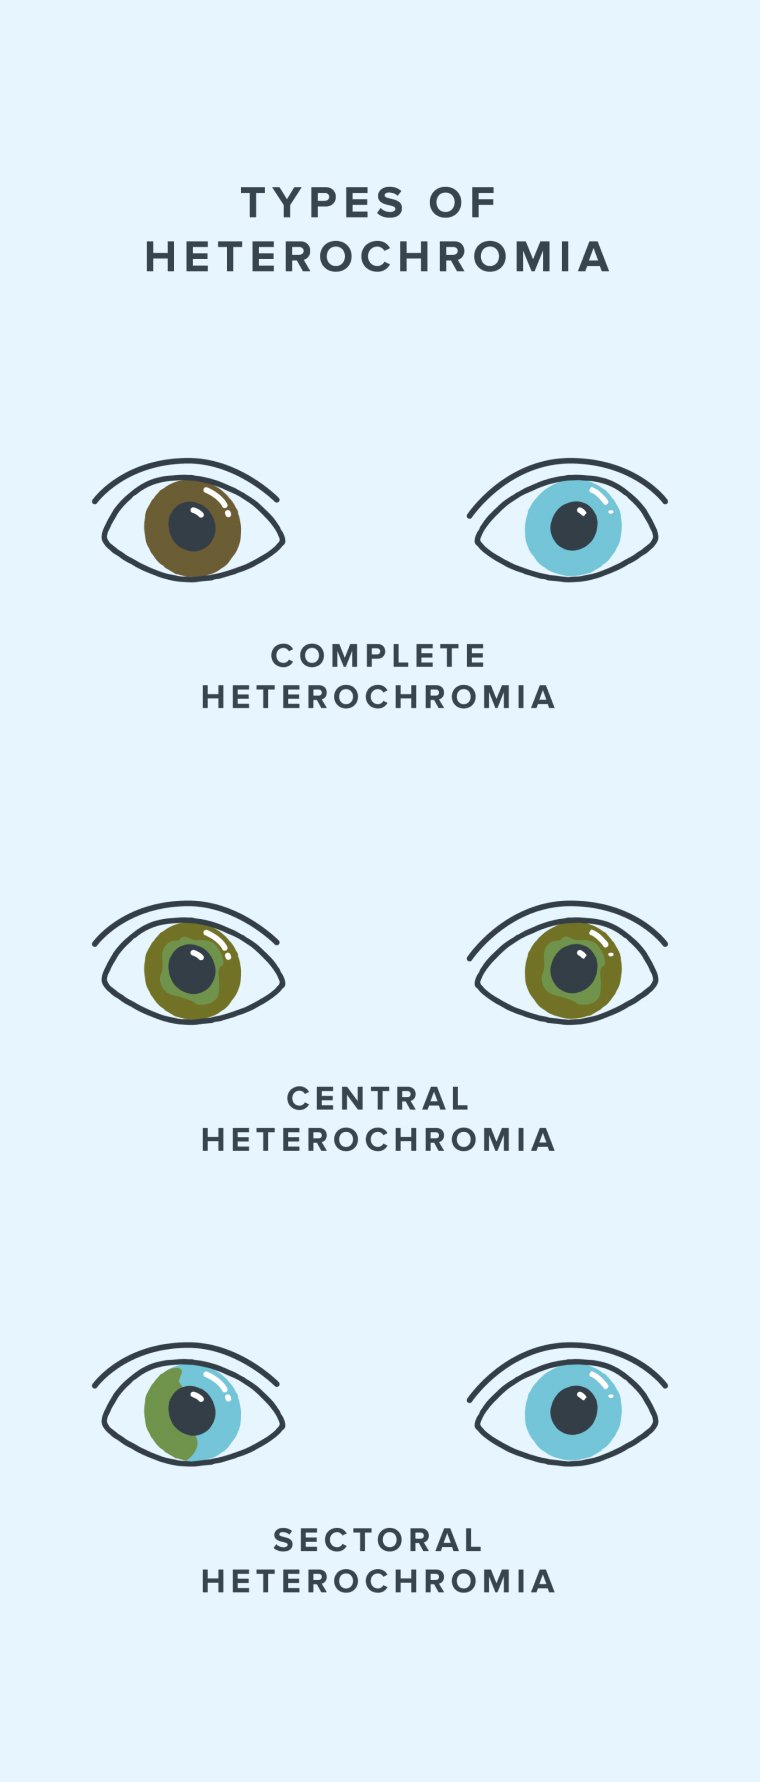 Infographic showing the different types of heterochromia